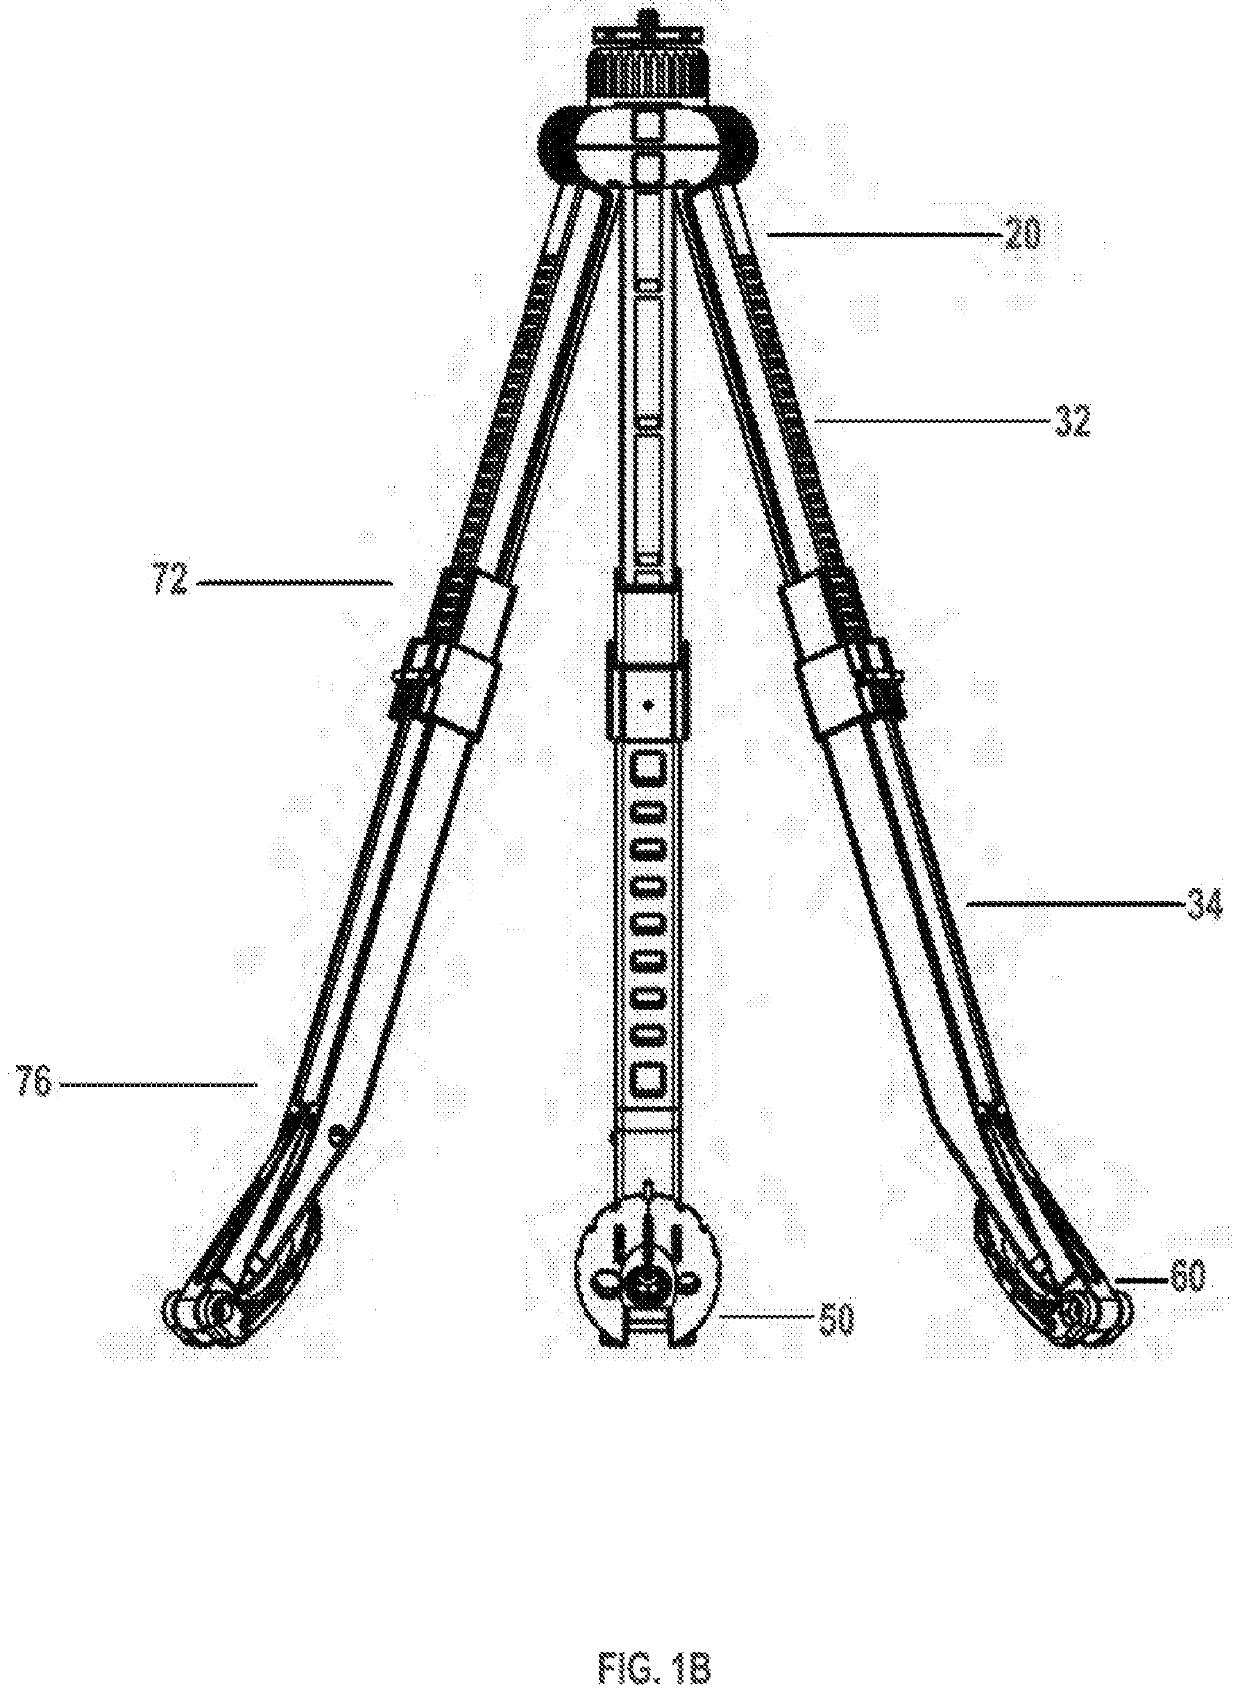 Multipod with variable independently angularly articulating lockable legs and monopod tip with concealable stud